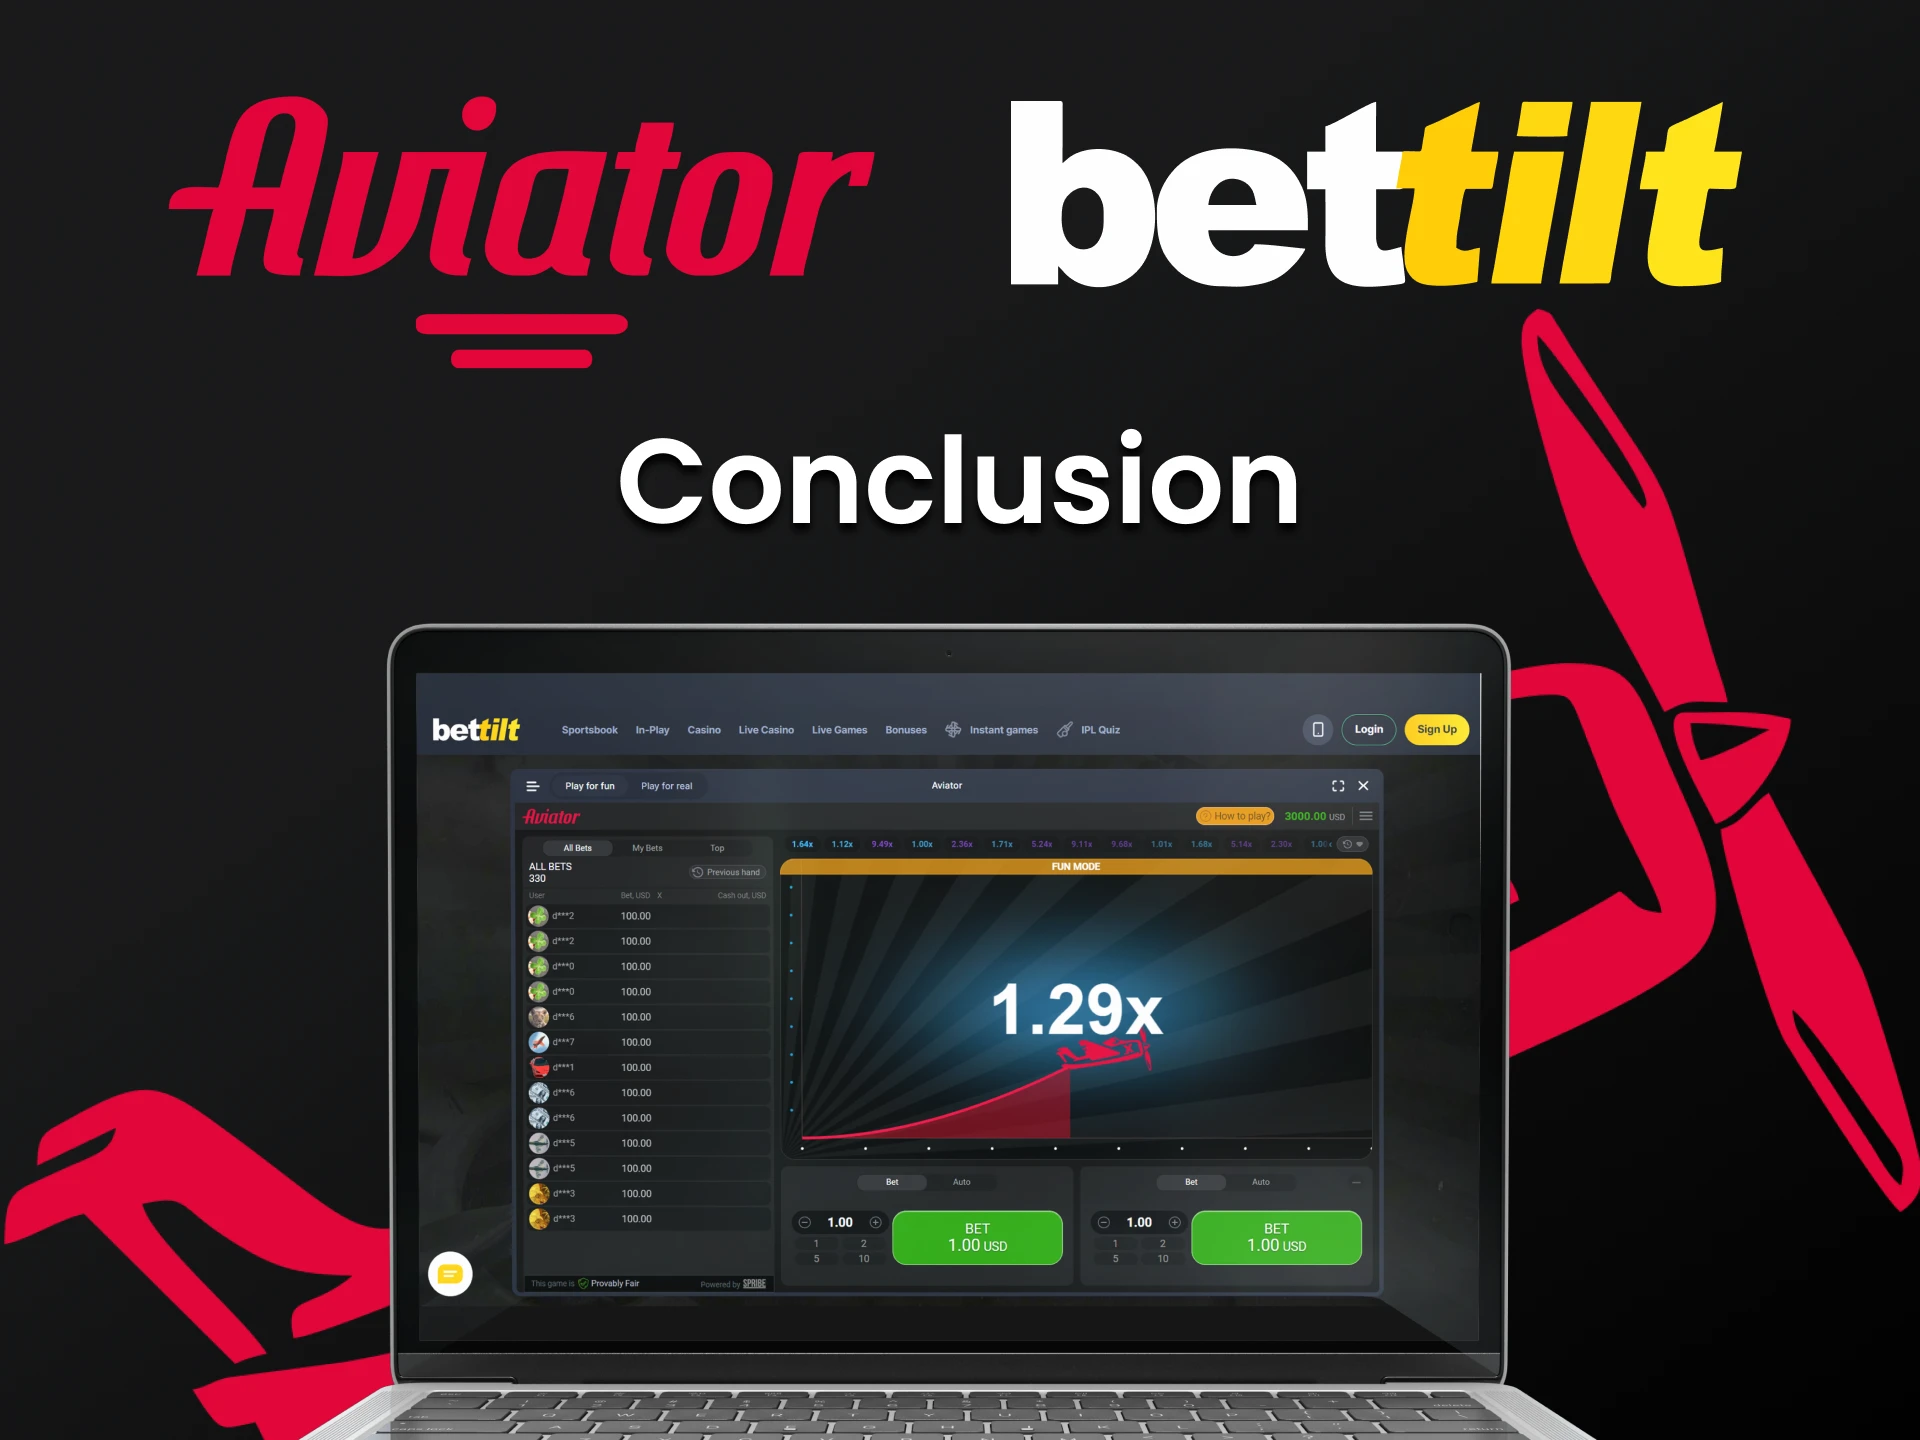 The Bettilt service is ideal for playing Aviator.